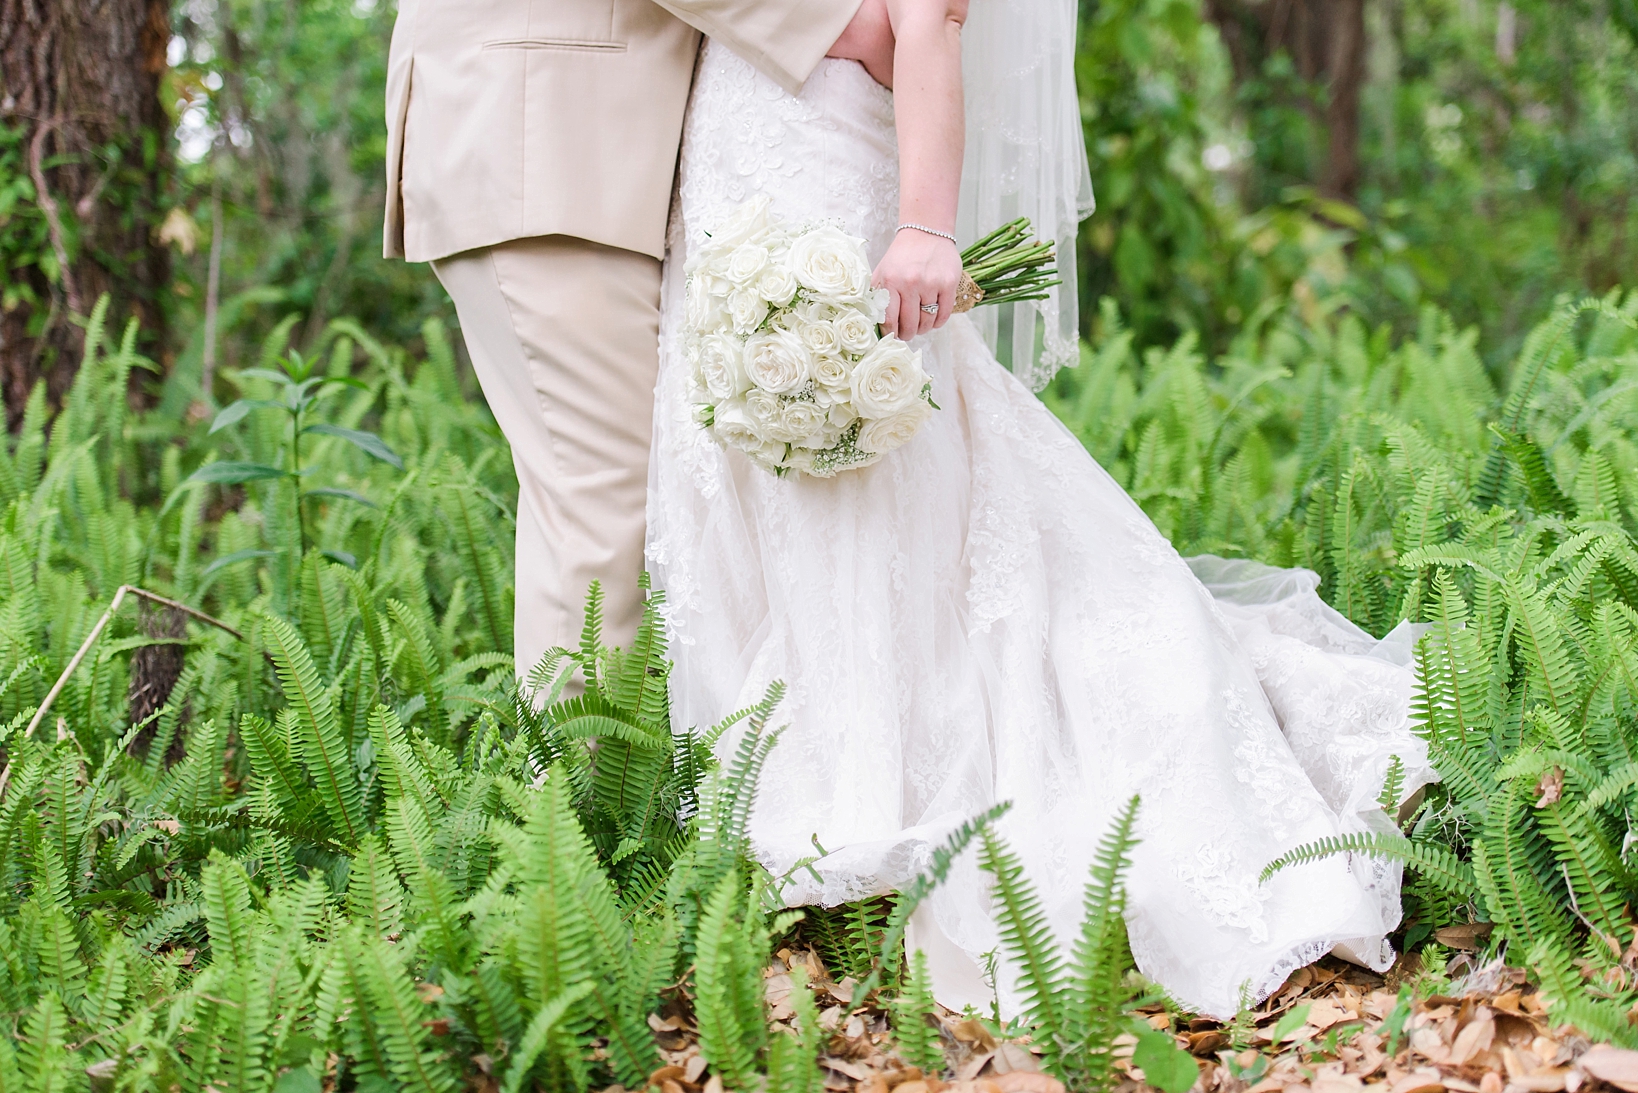 White roses wedding bouquet and groom in a cream suit surrounded by ferns